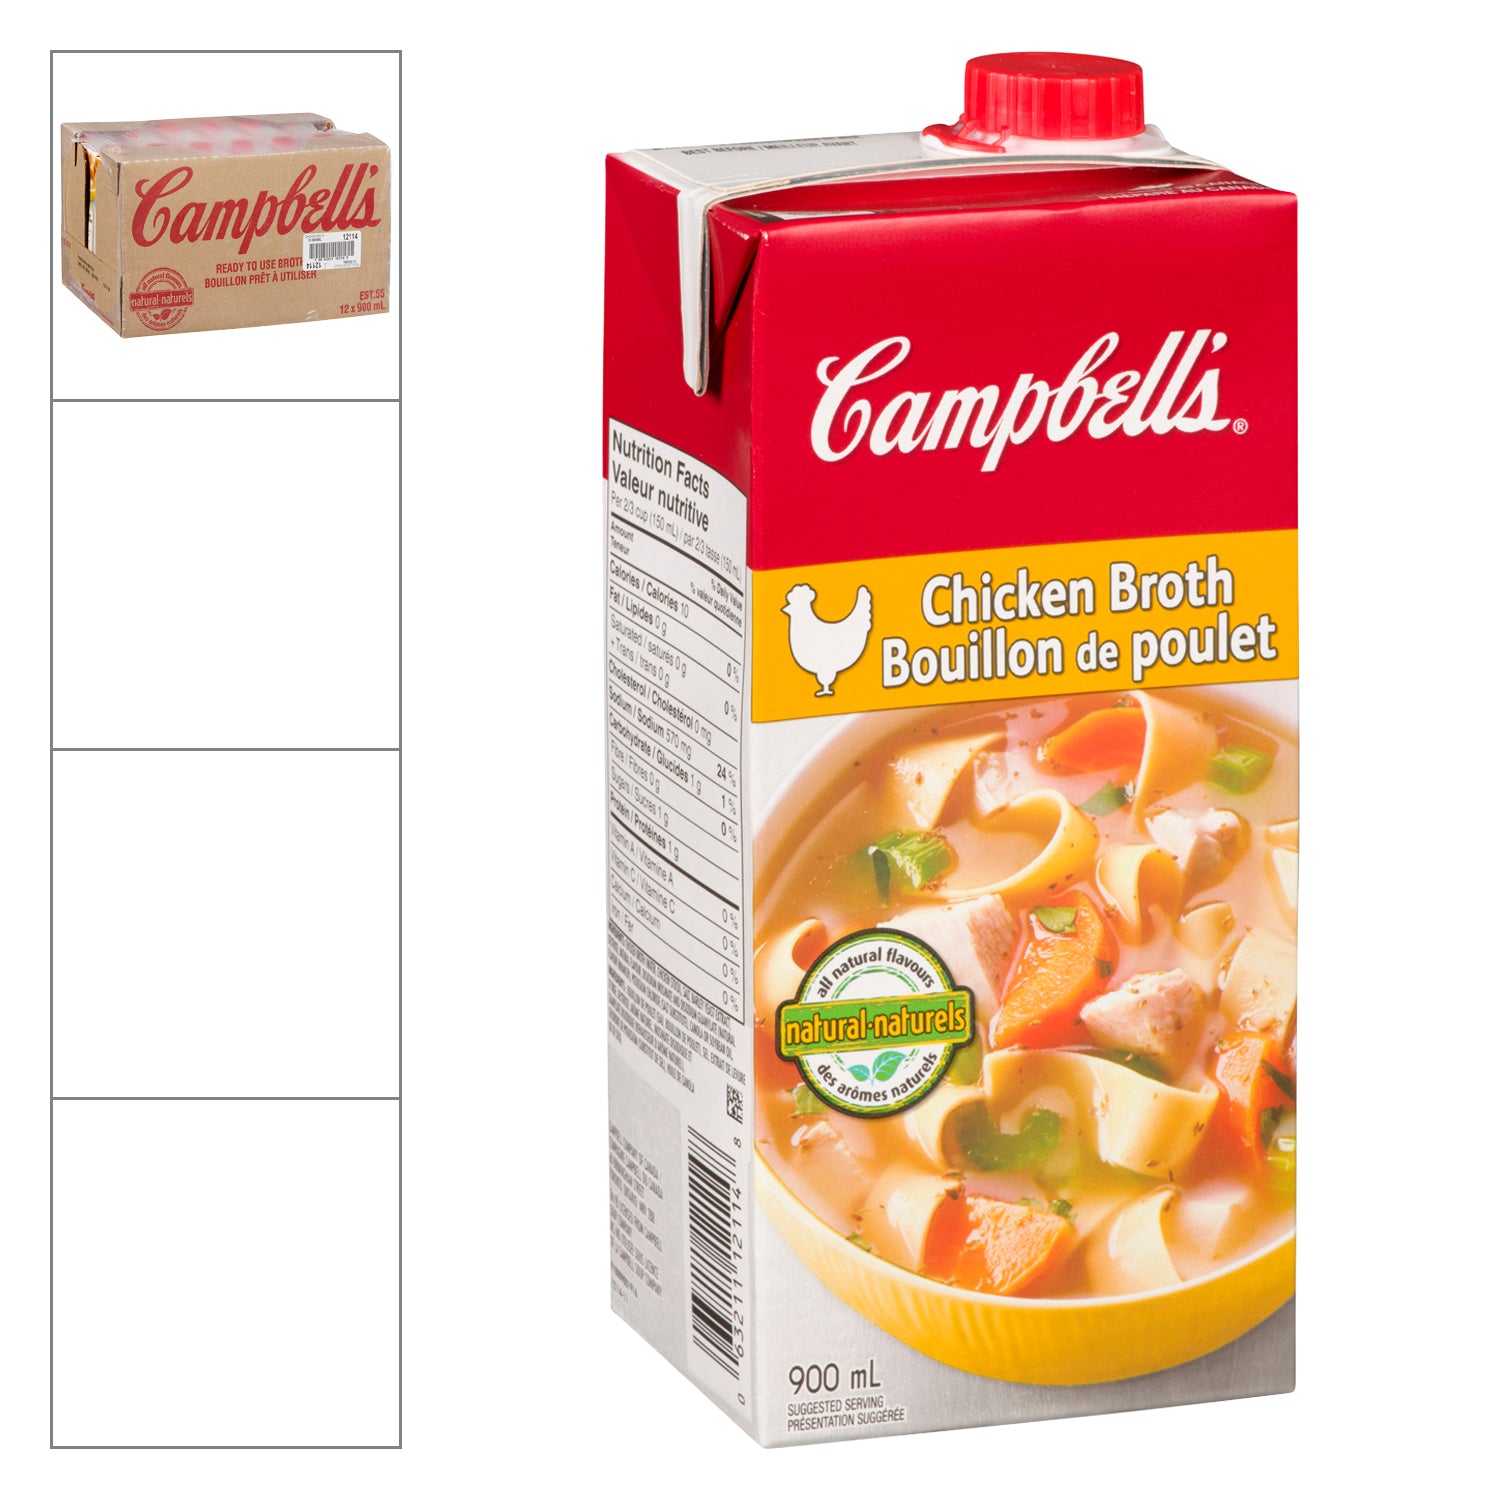 Campbell's Chicken Broth 12x900ml [$3.33/ea]